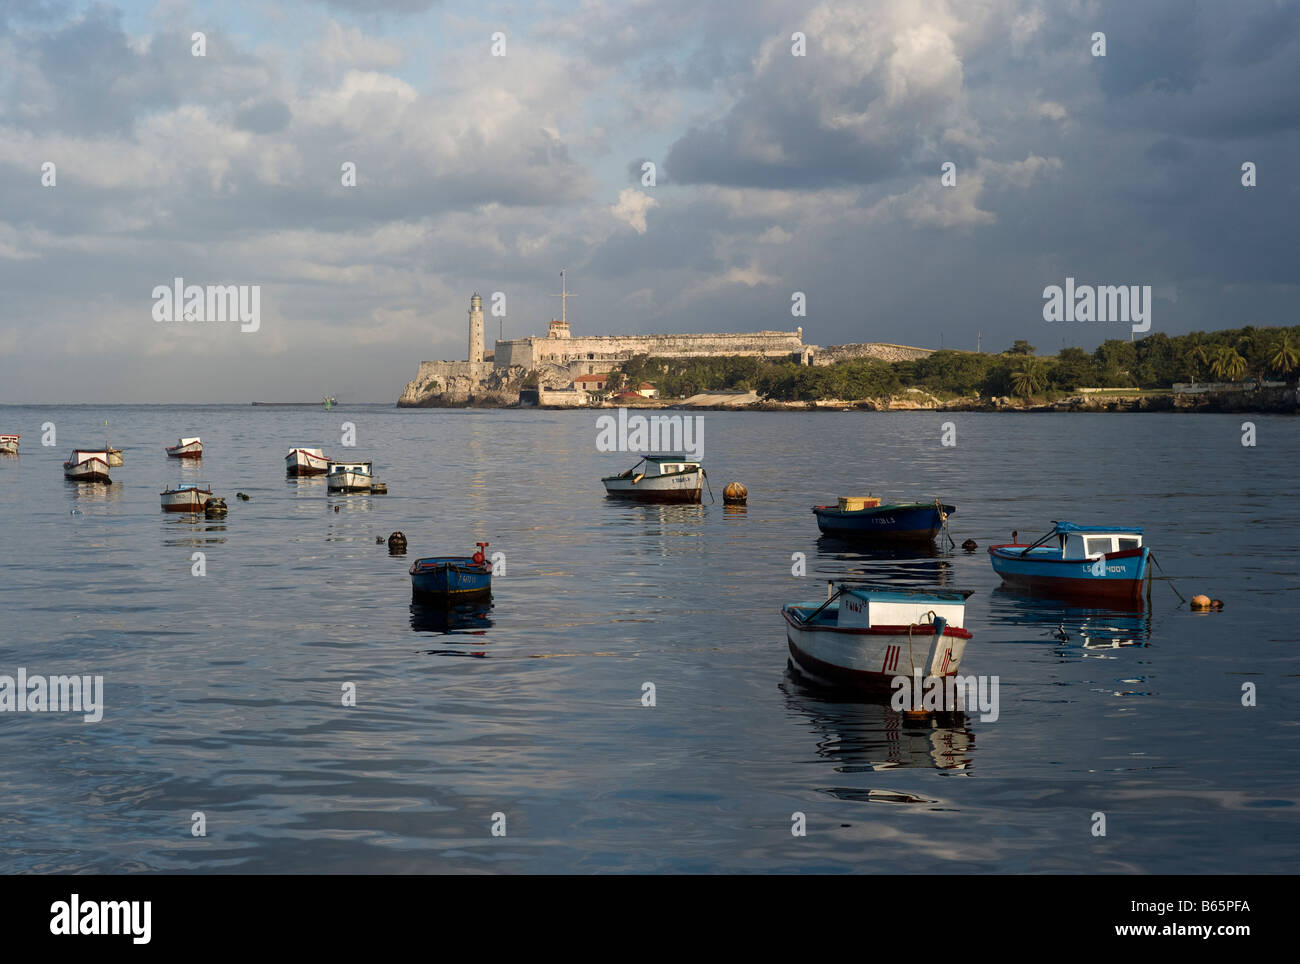 Lighthouse at the entrance to the port of Havana with small fishing boats in foreground. Taken early morning in November. Stock Photo